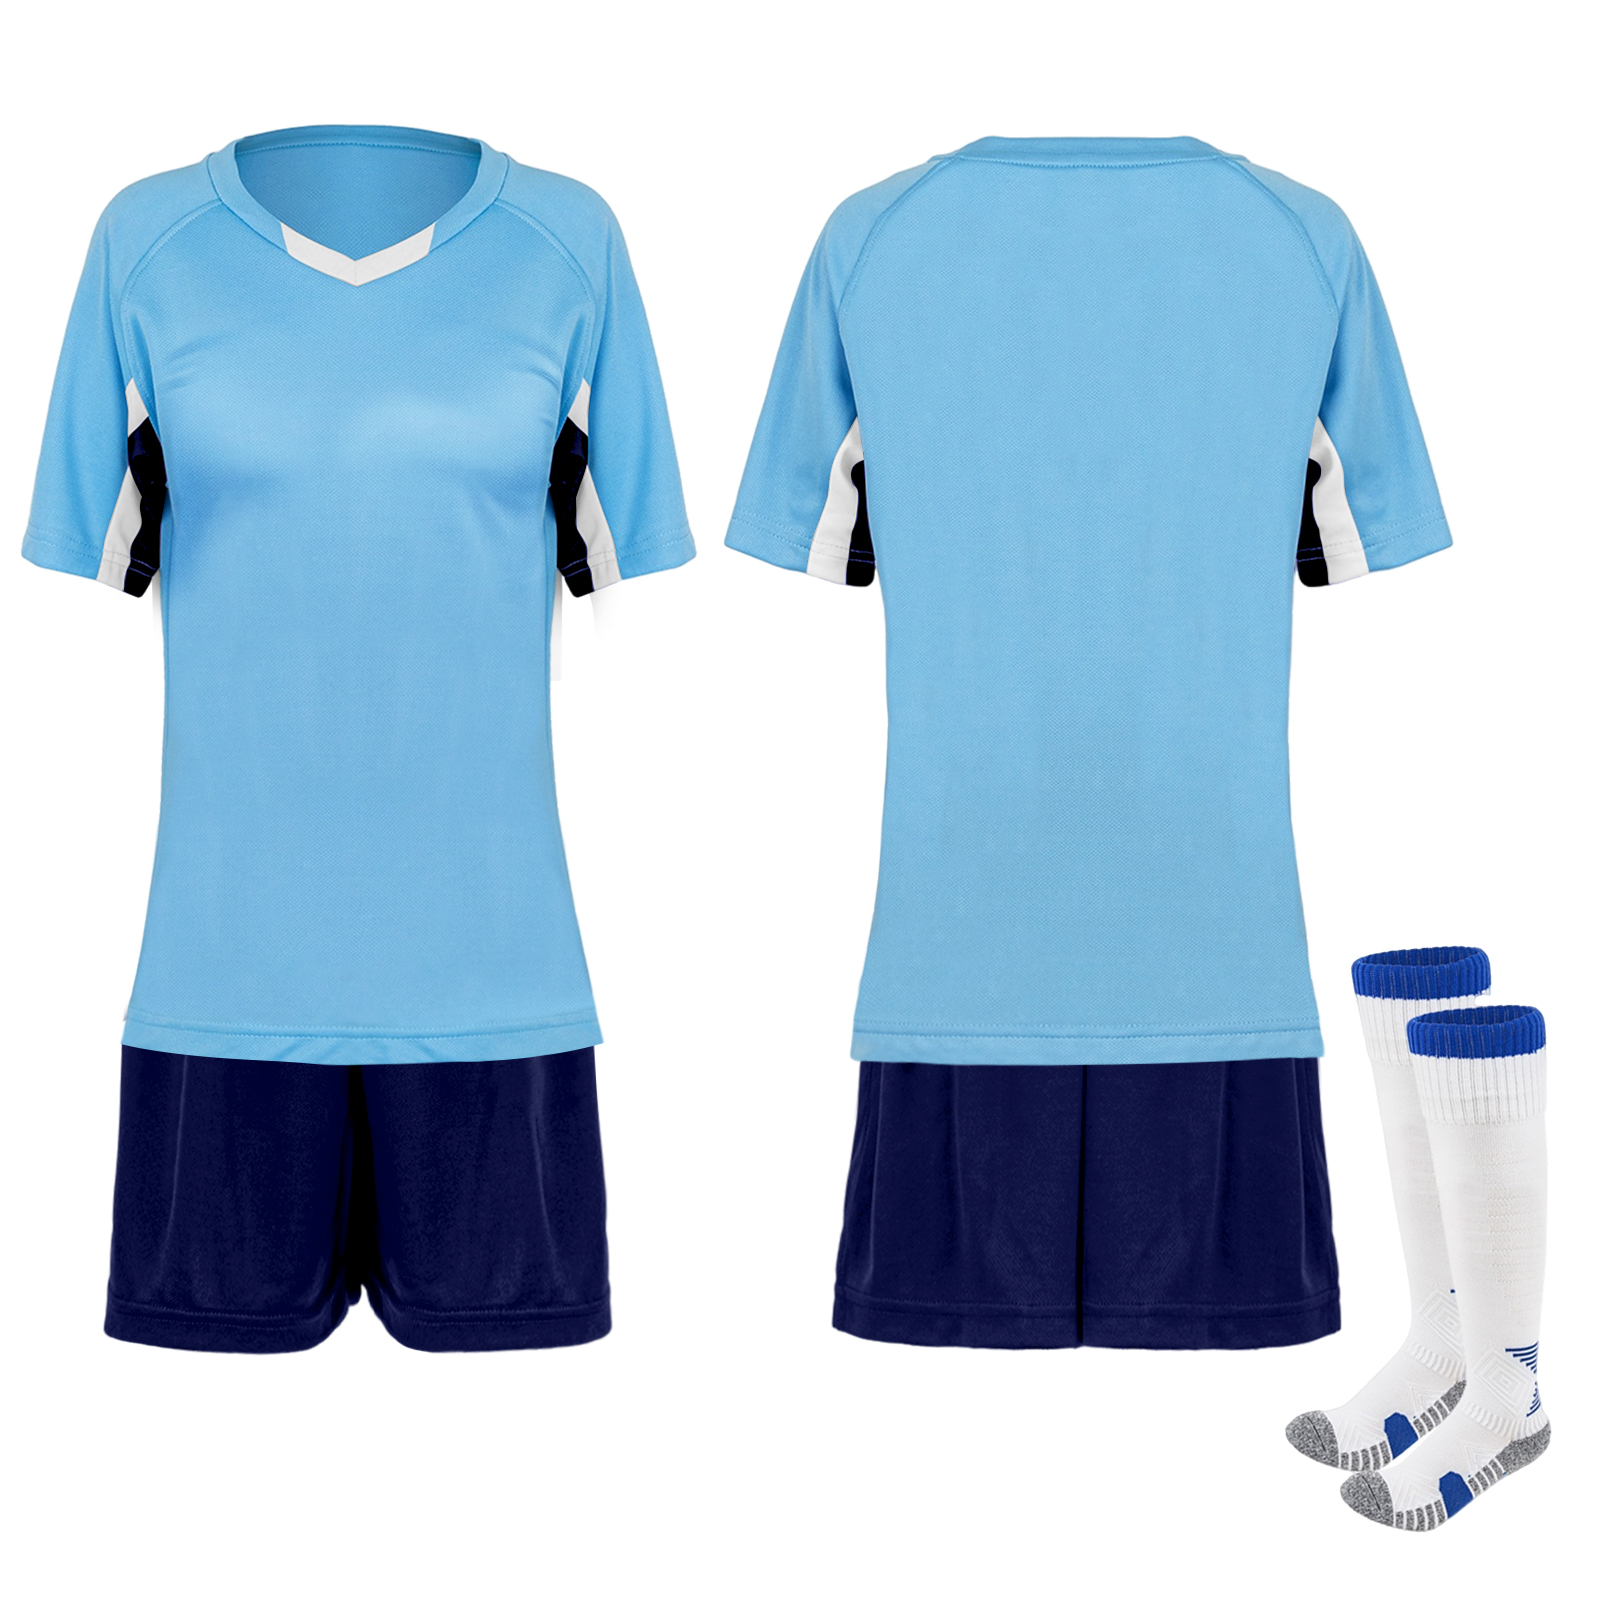 TOPTIE Unisex Soccer Jerseys for Kids, Soccer Uniform Sets for Boys and  Girls, with Jersey, Shorts and Socks Sale, Reviews. - Opentip